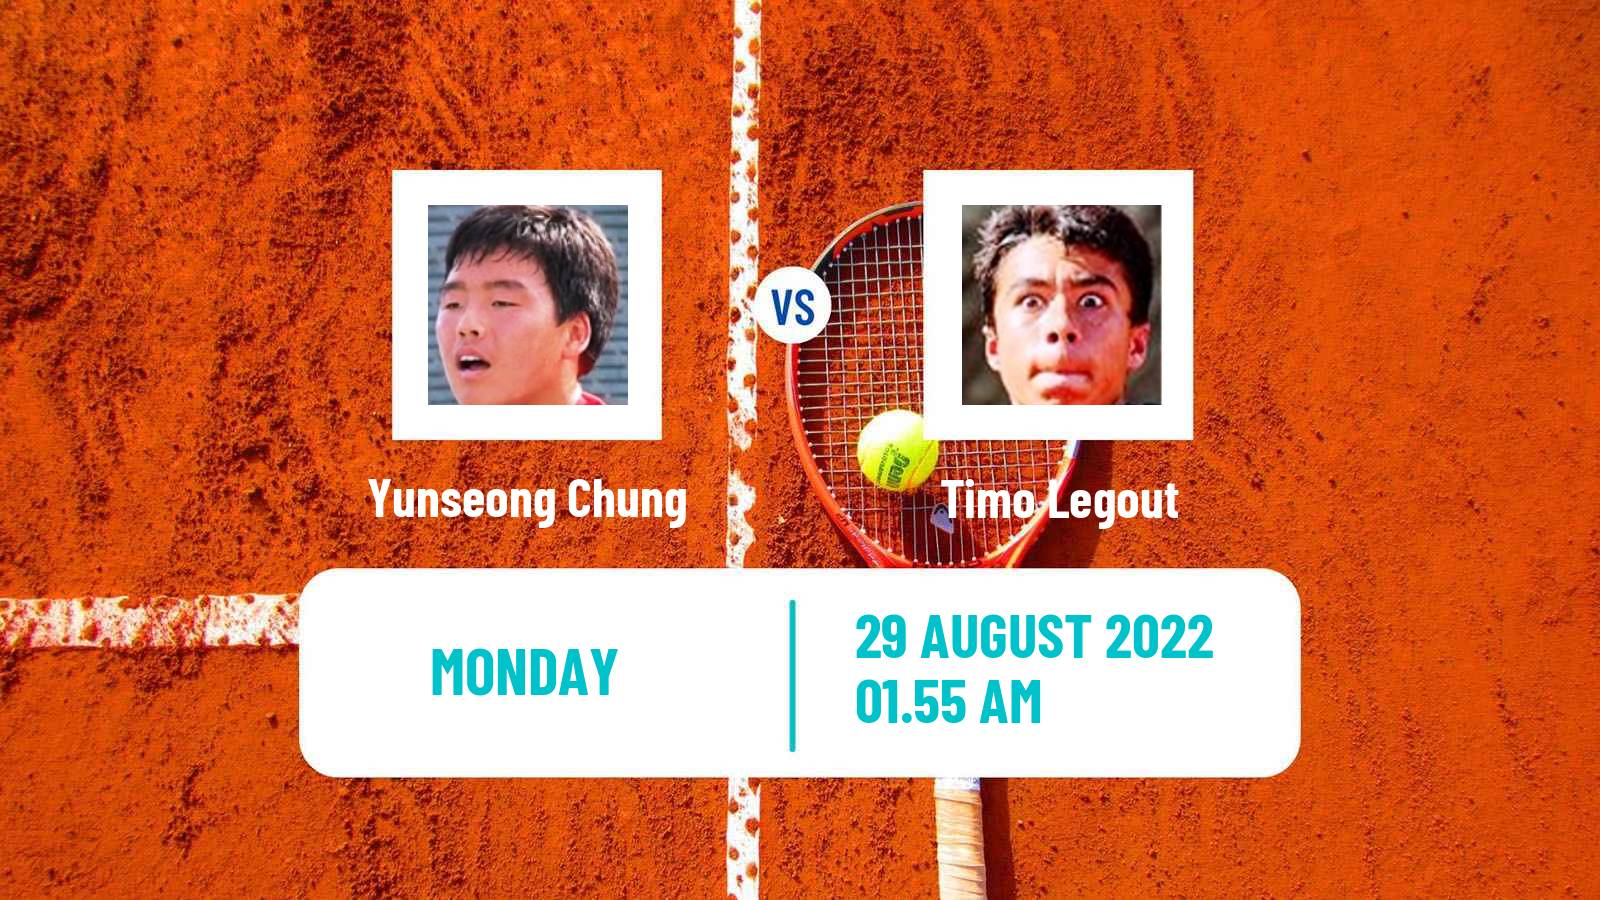 Tennis ATP Challenger Yunseong Chung - Timo Legout